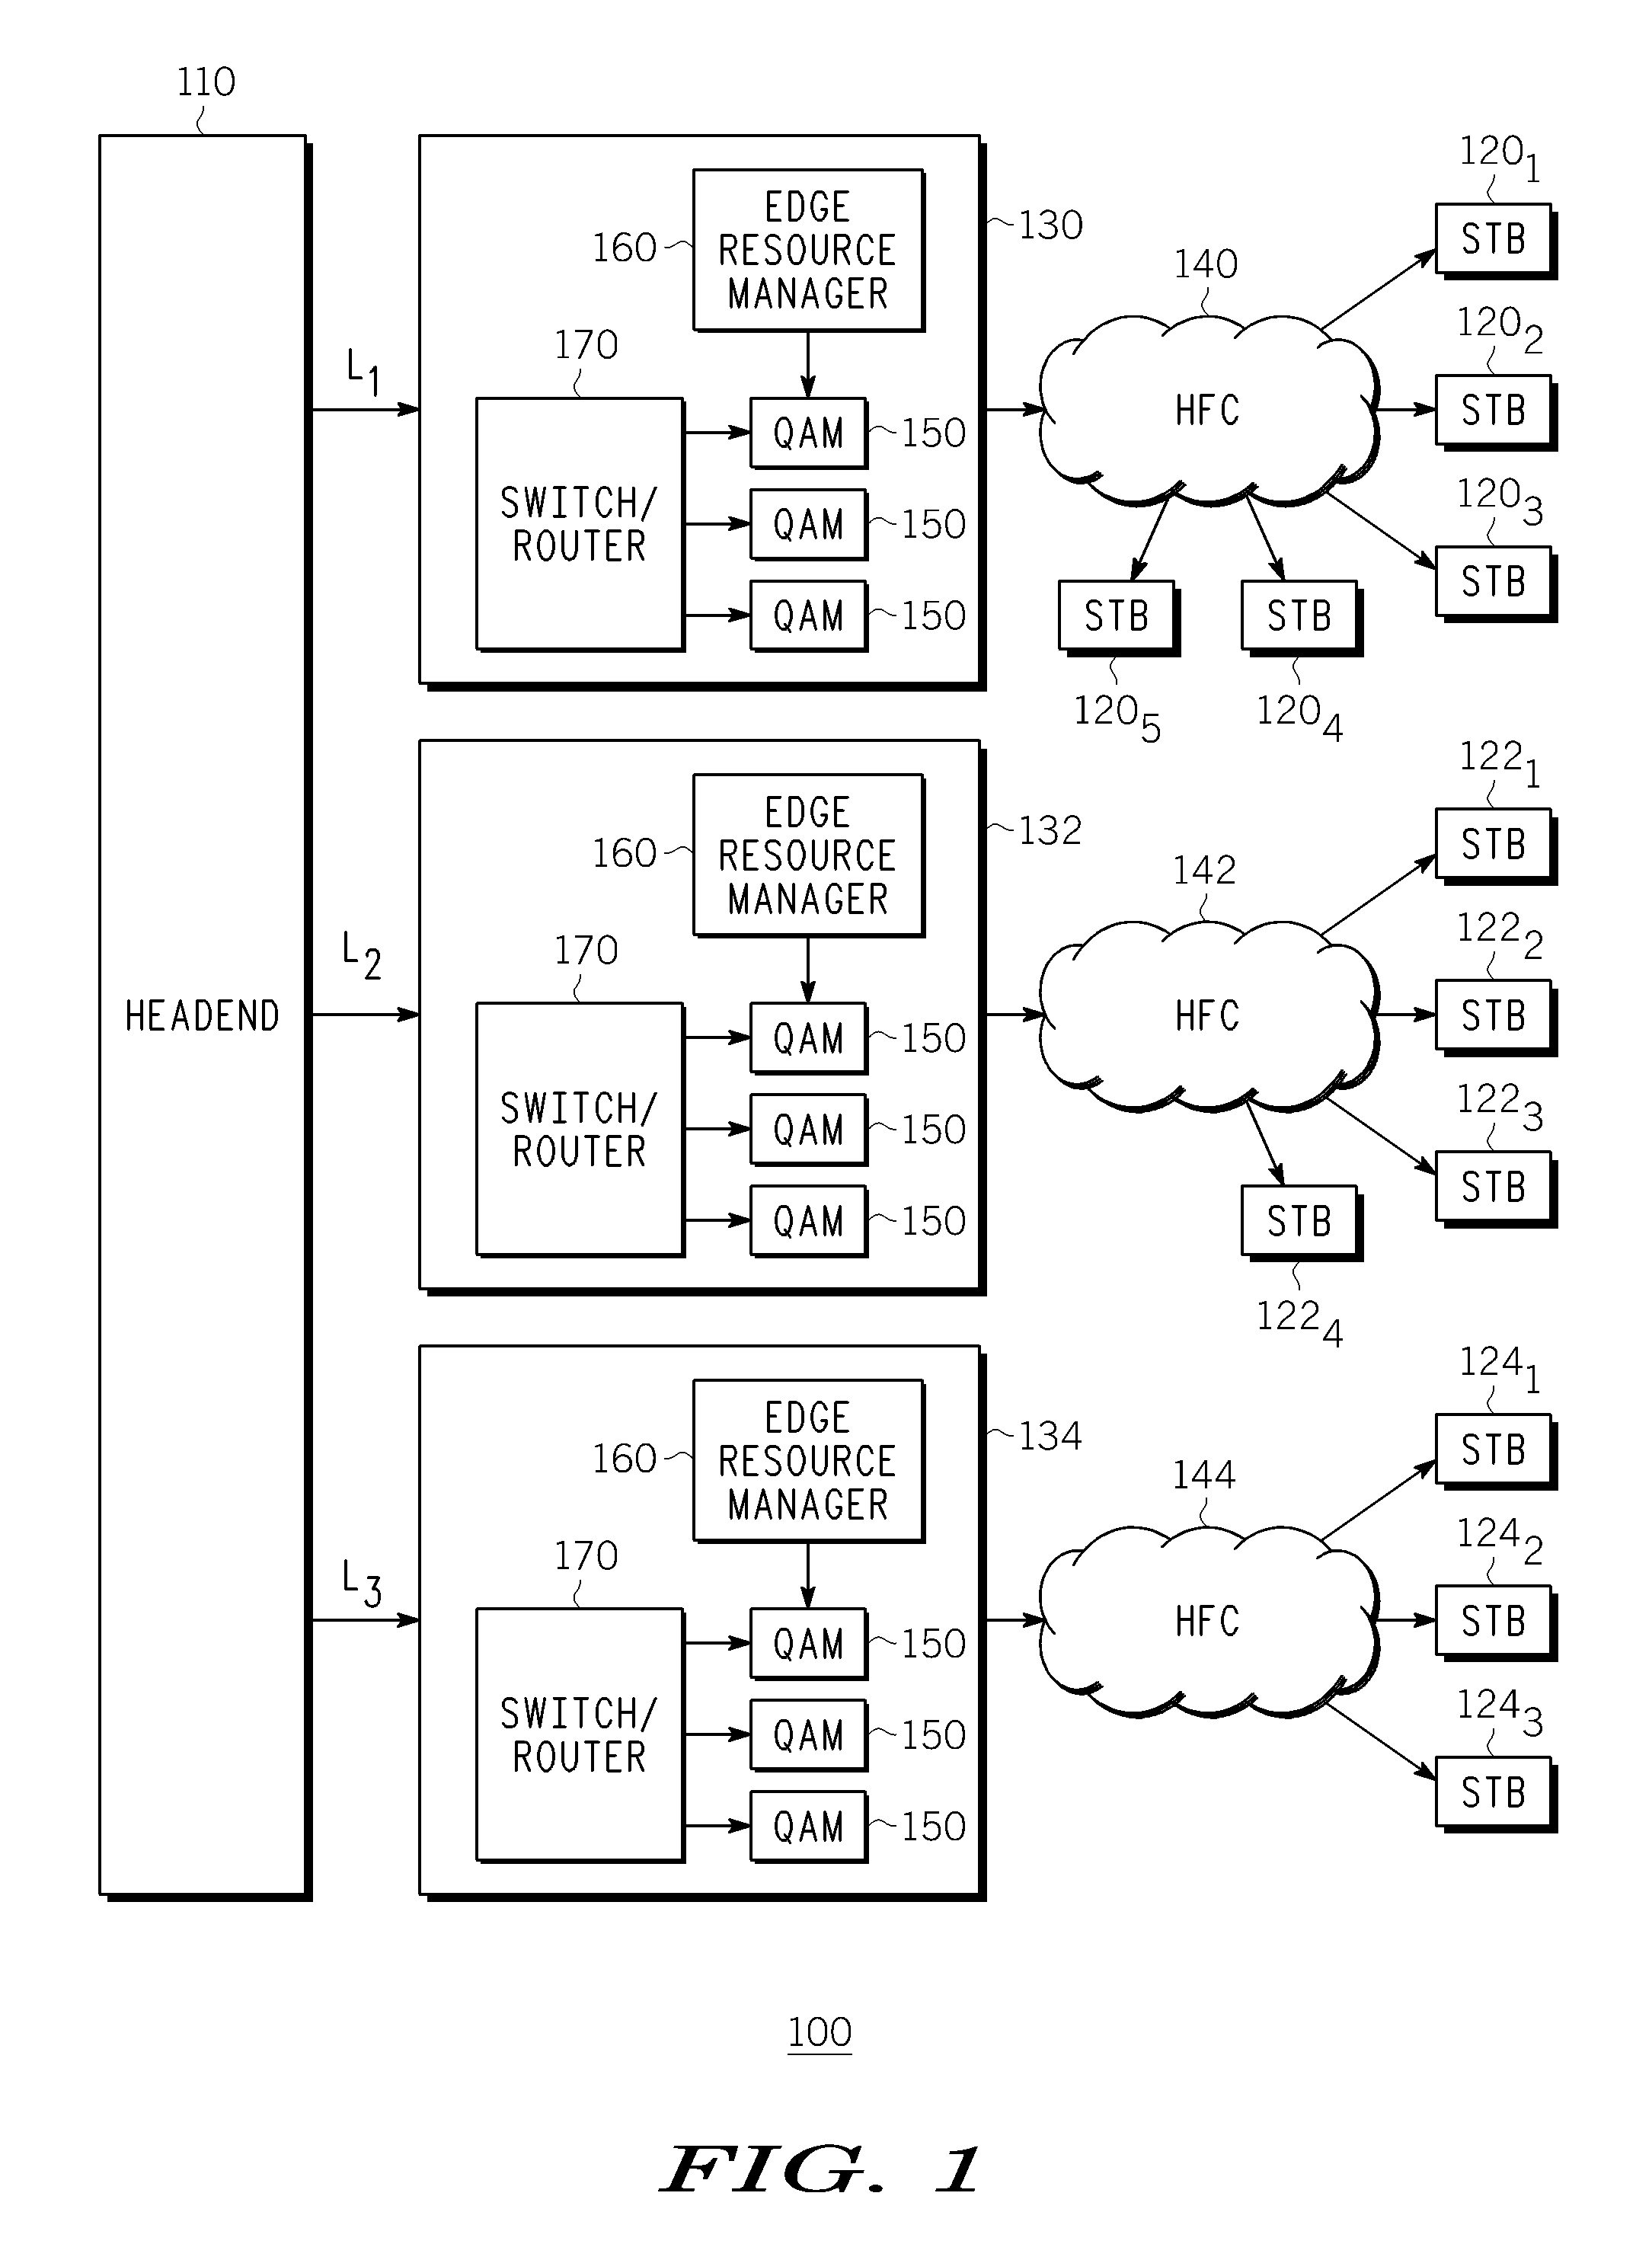 Method And Apparatus For Delivering Emergency Alert System (EAS) Messages Over A Switched Digital Video (SDV) System